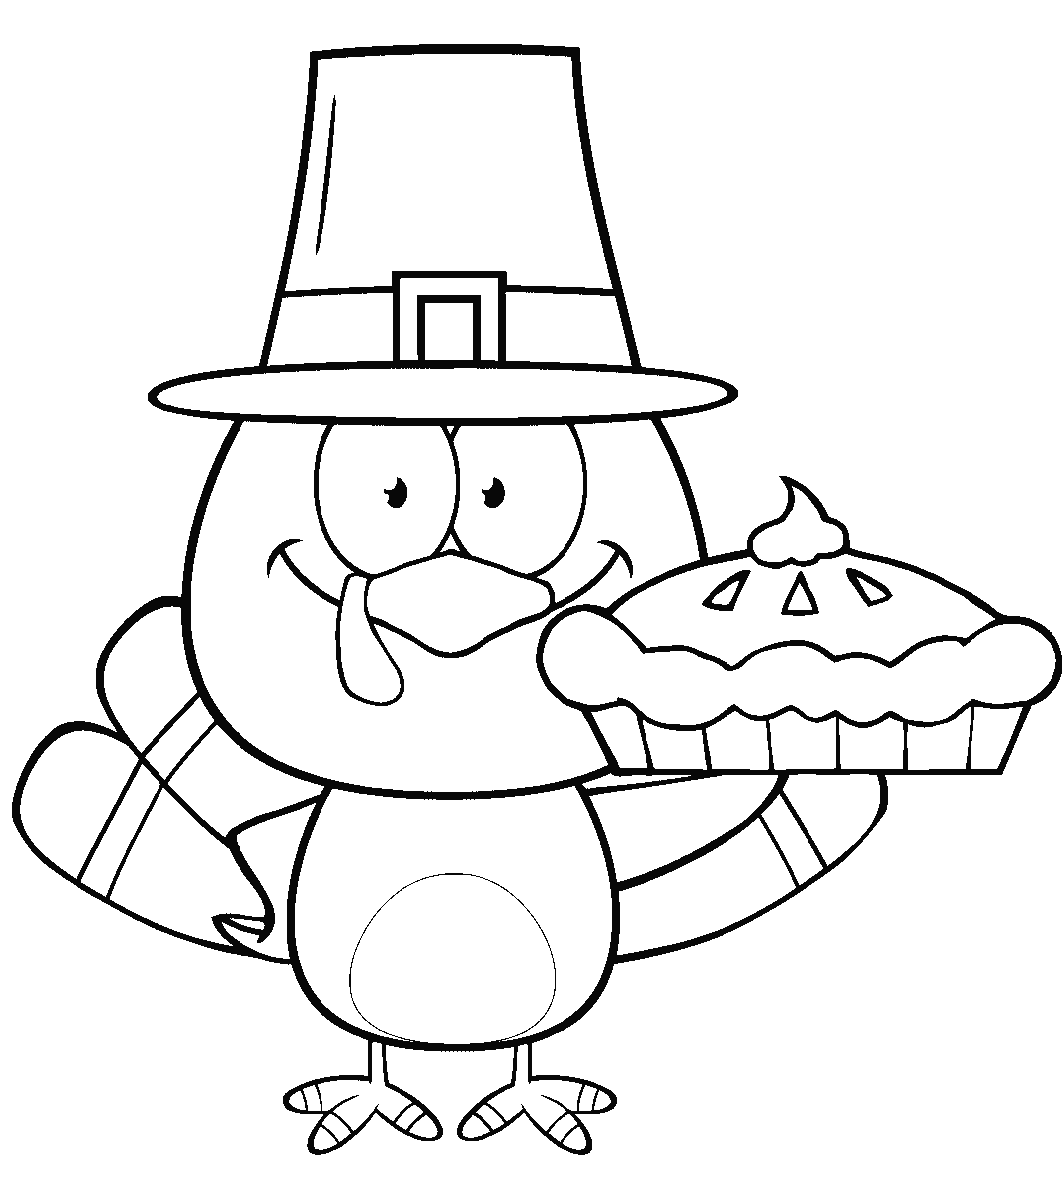 Free Printable Funny Looking Turkey Coloring Page for Thanksgiving